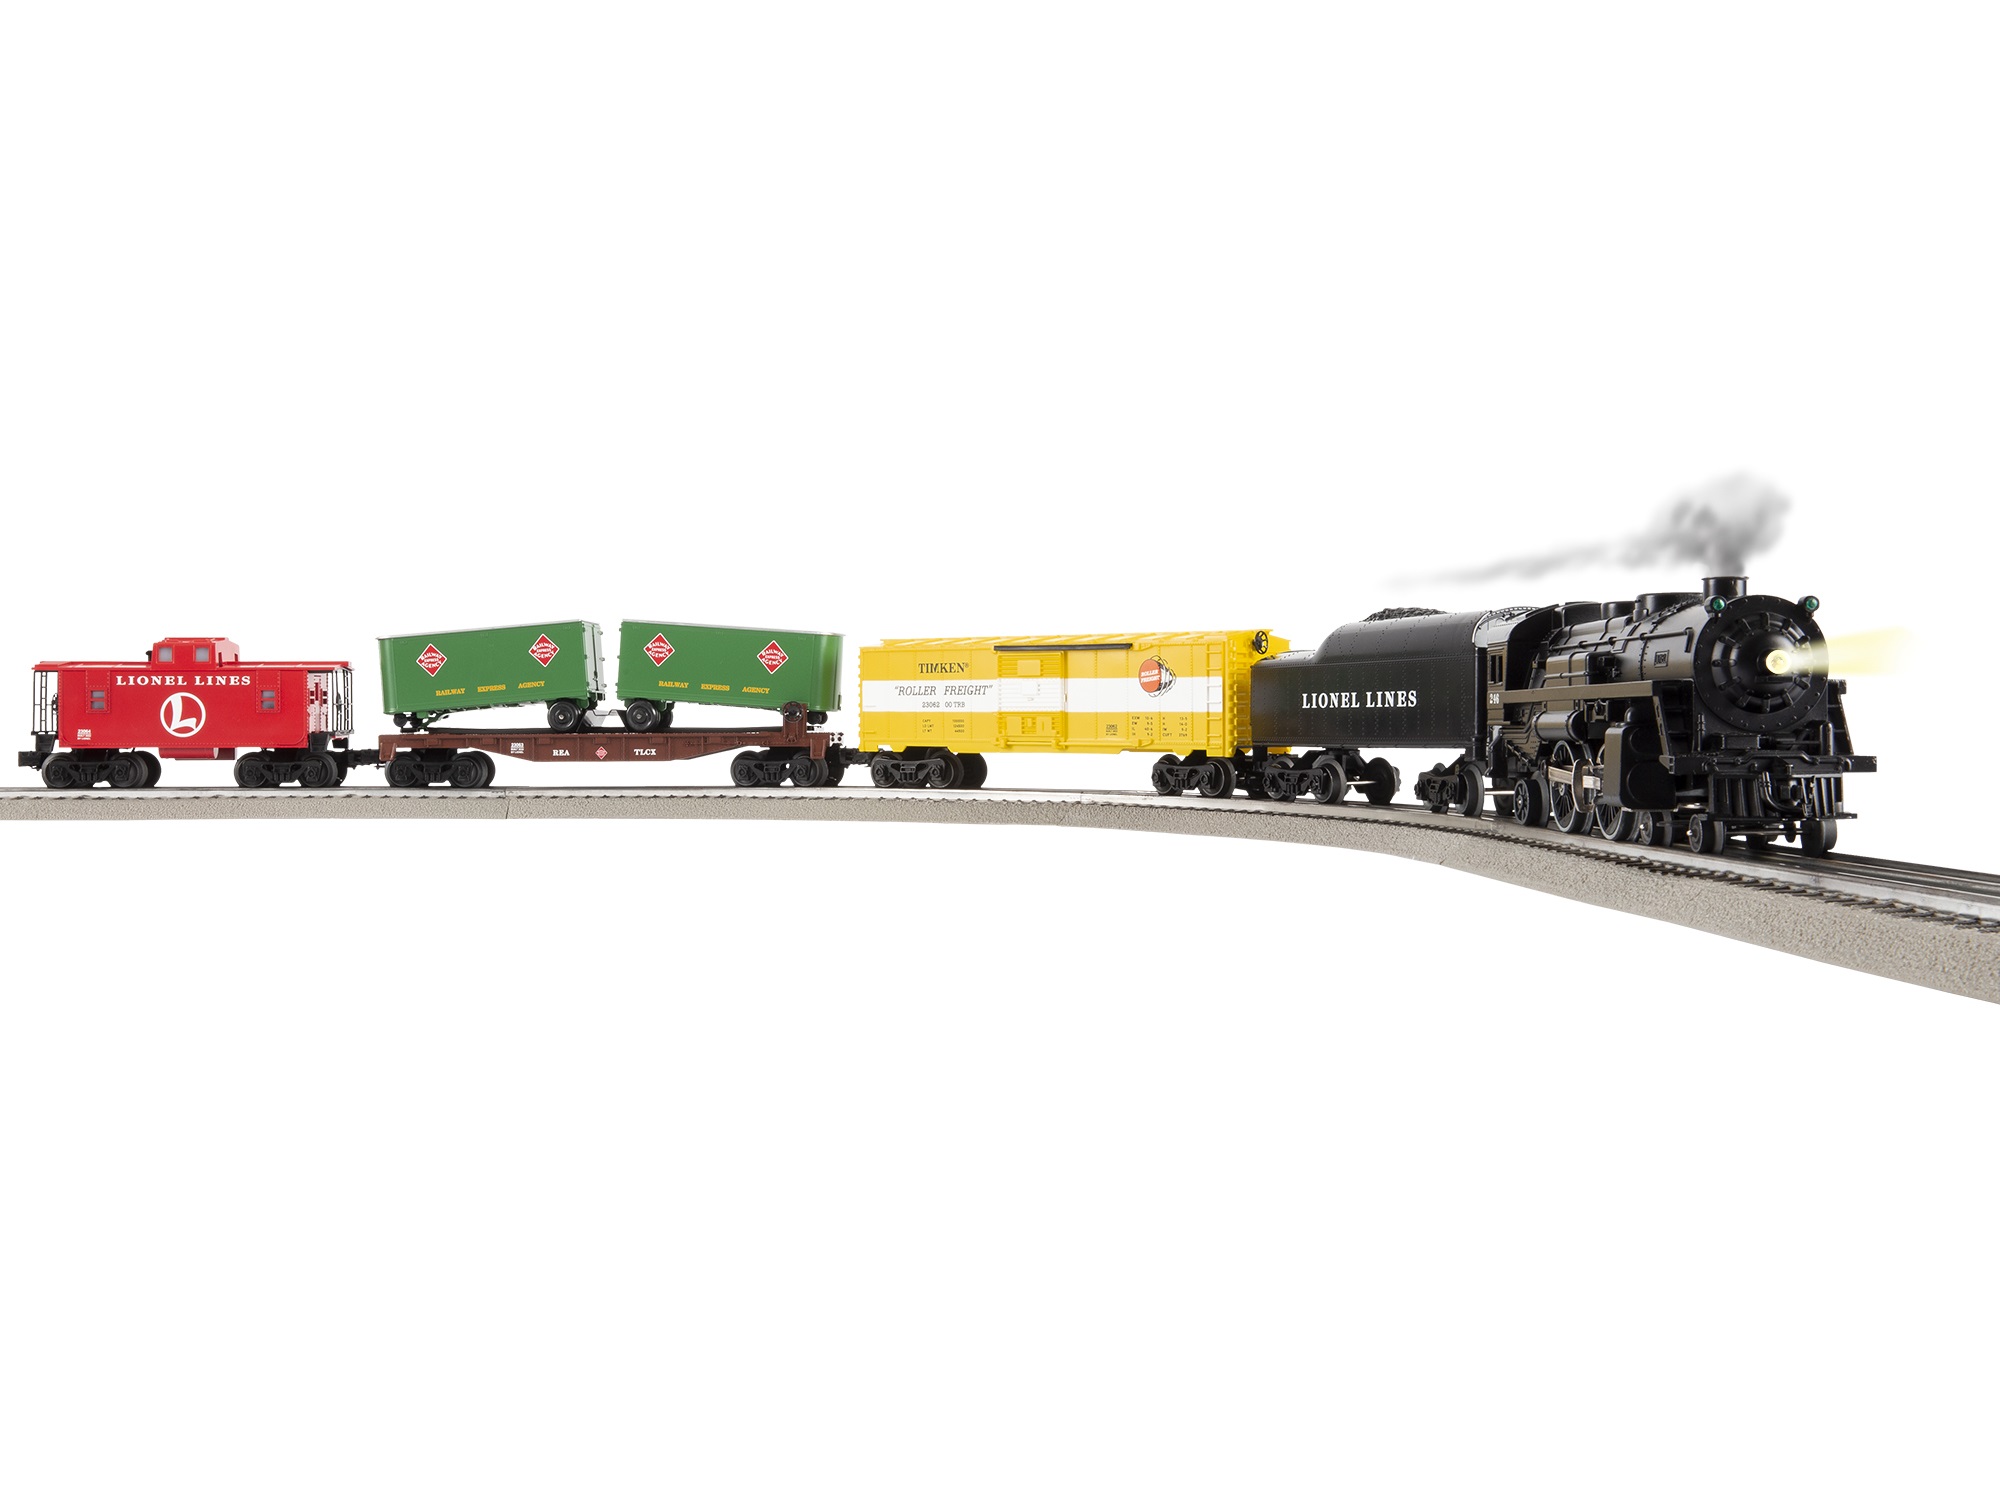 2019 Lionel Trains Product Catalog Featuring Ready to Run Sets O Scale & More for sale online 